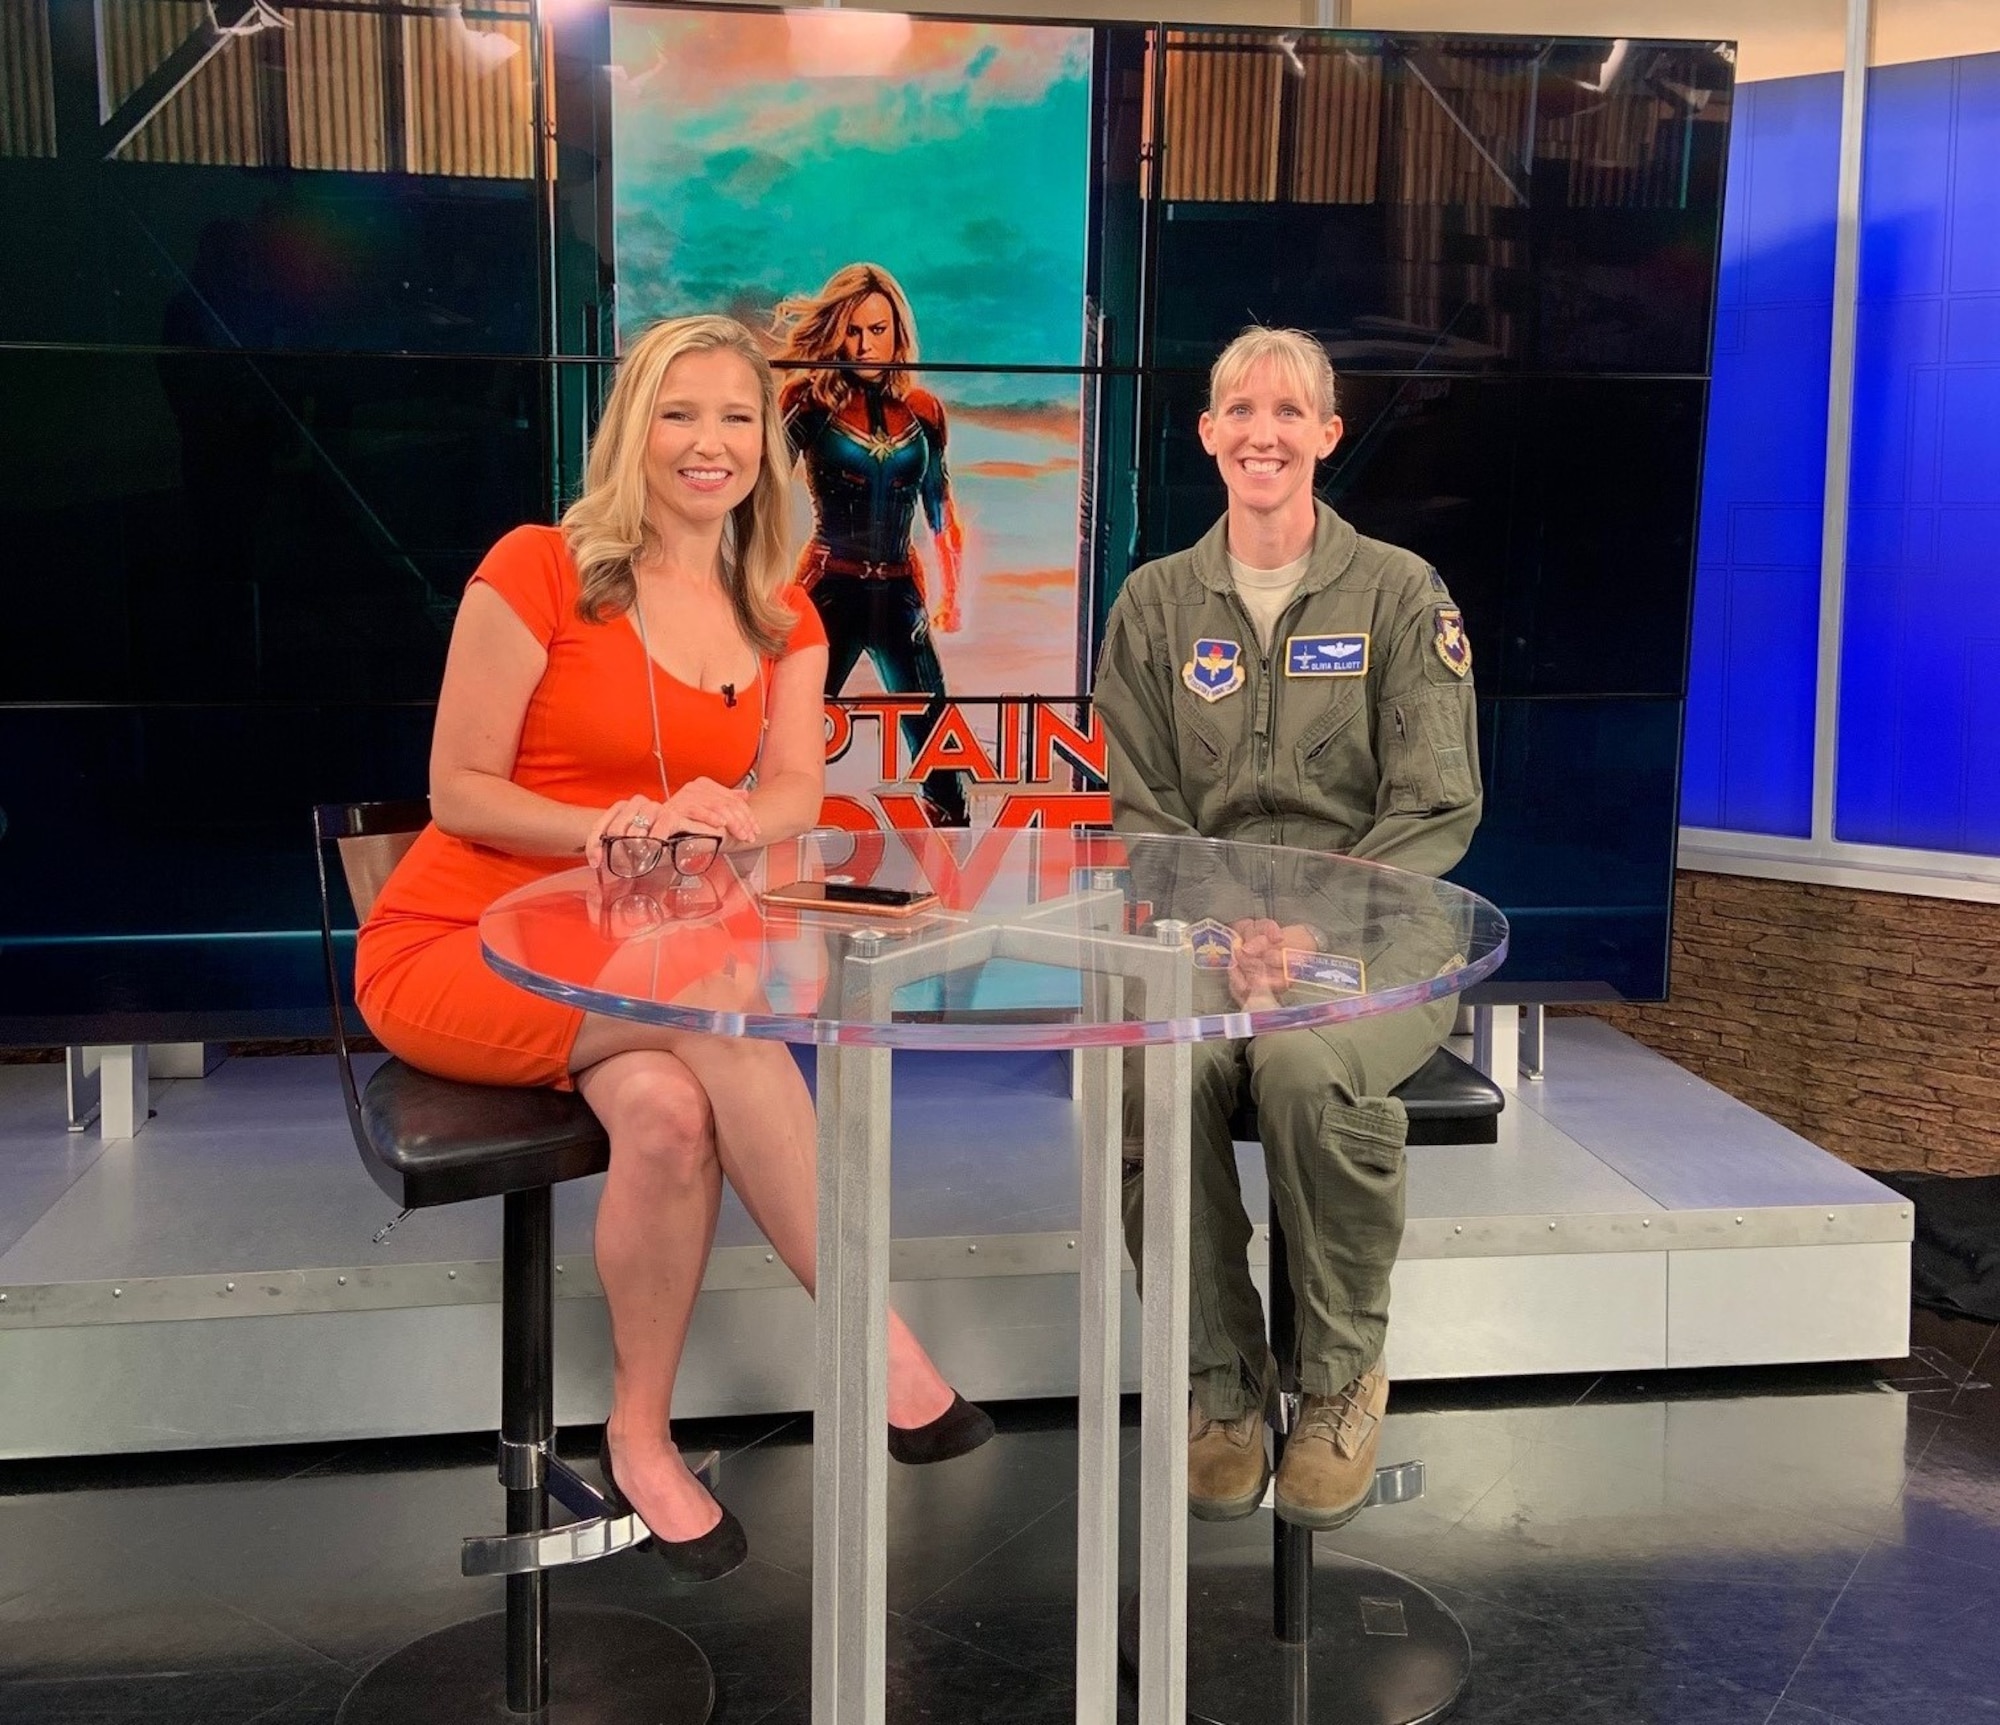 Lt. Col. Olivia Elliott, visited news station Fox 19 to talk about her career as an Air Force pilot to news anchor Rebecca Smith in Cincinnati, Ohio on June 11.As part of the DVD and digital release of the Captain Marvel movie, Elliott had the opportunity to share her experiences as a pilot. (U.S. Air Force photo/Stacey Geiger)